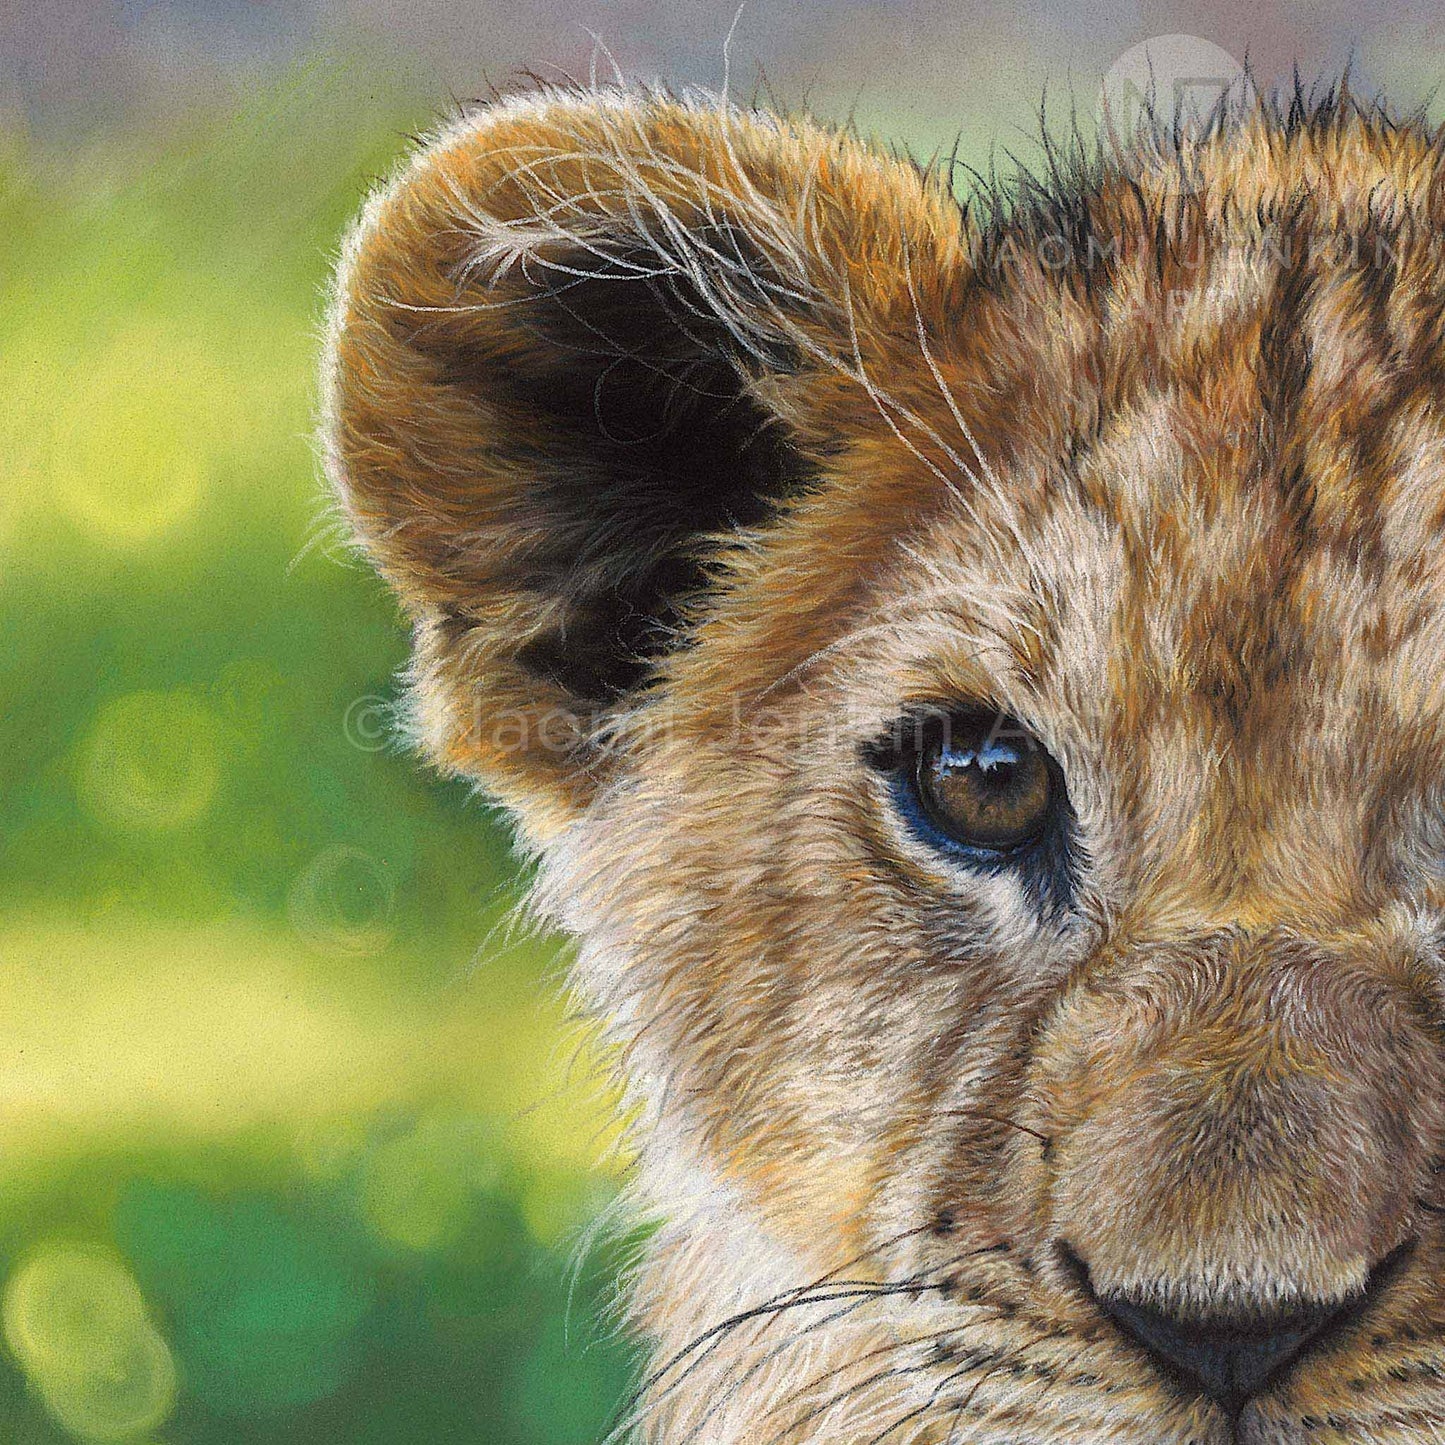 Close up lion cub face painting from the original 'Lyin Around' lion artwork by Naomi Jenkin